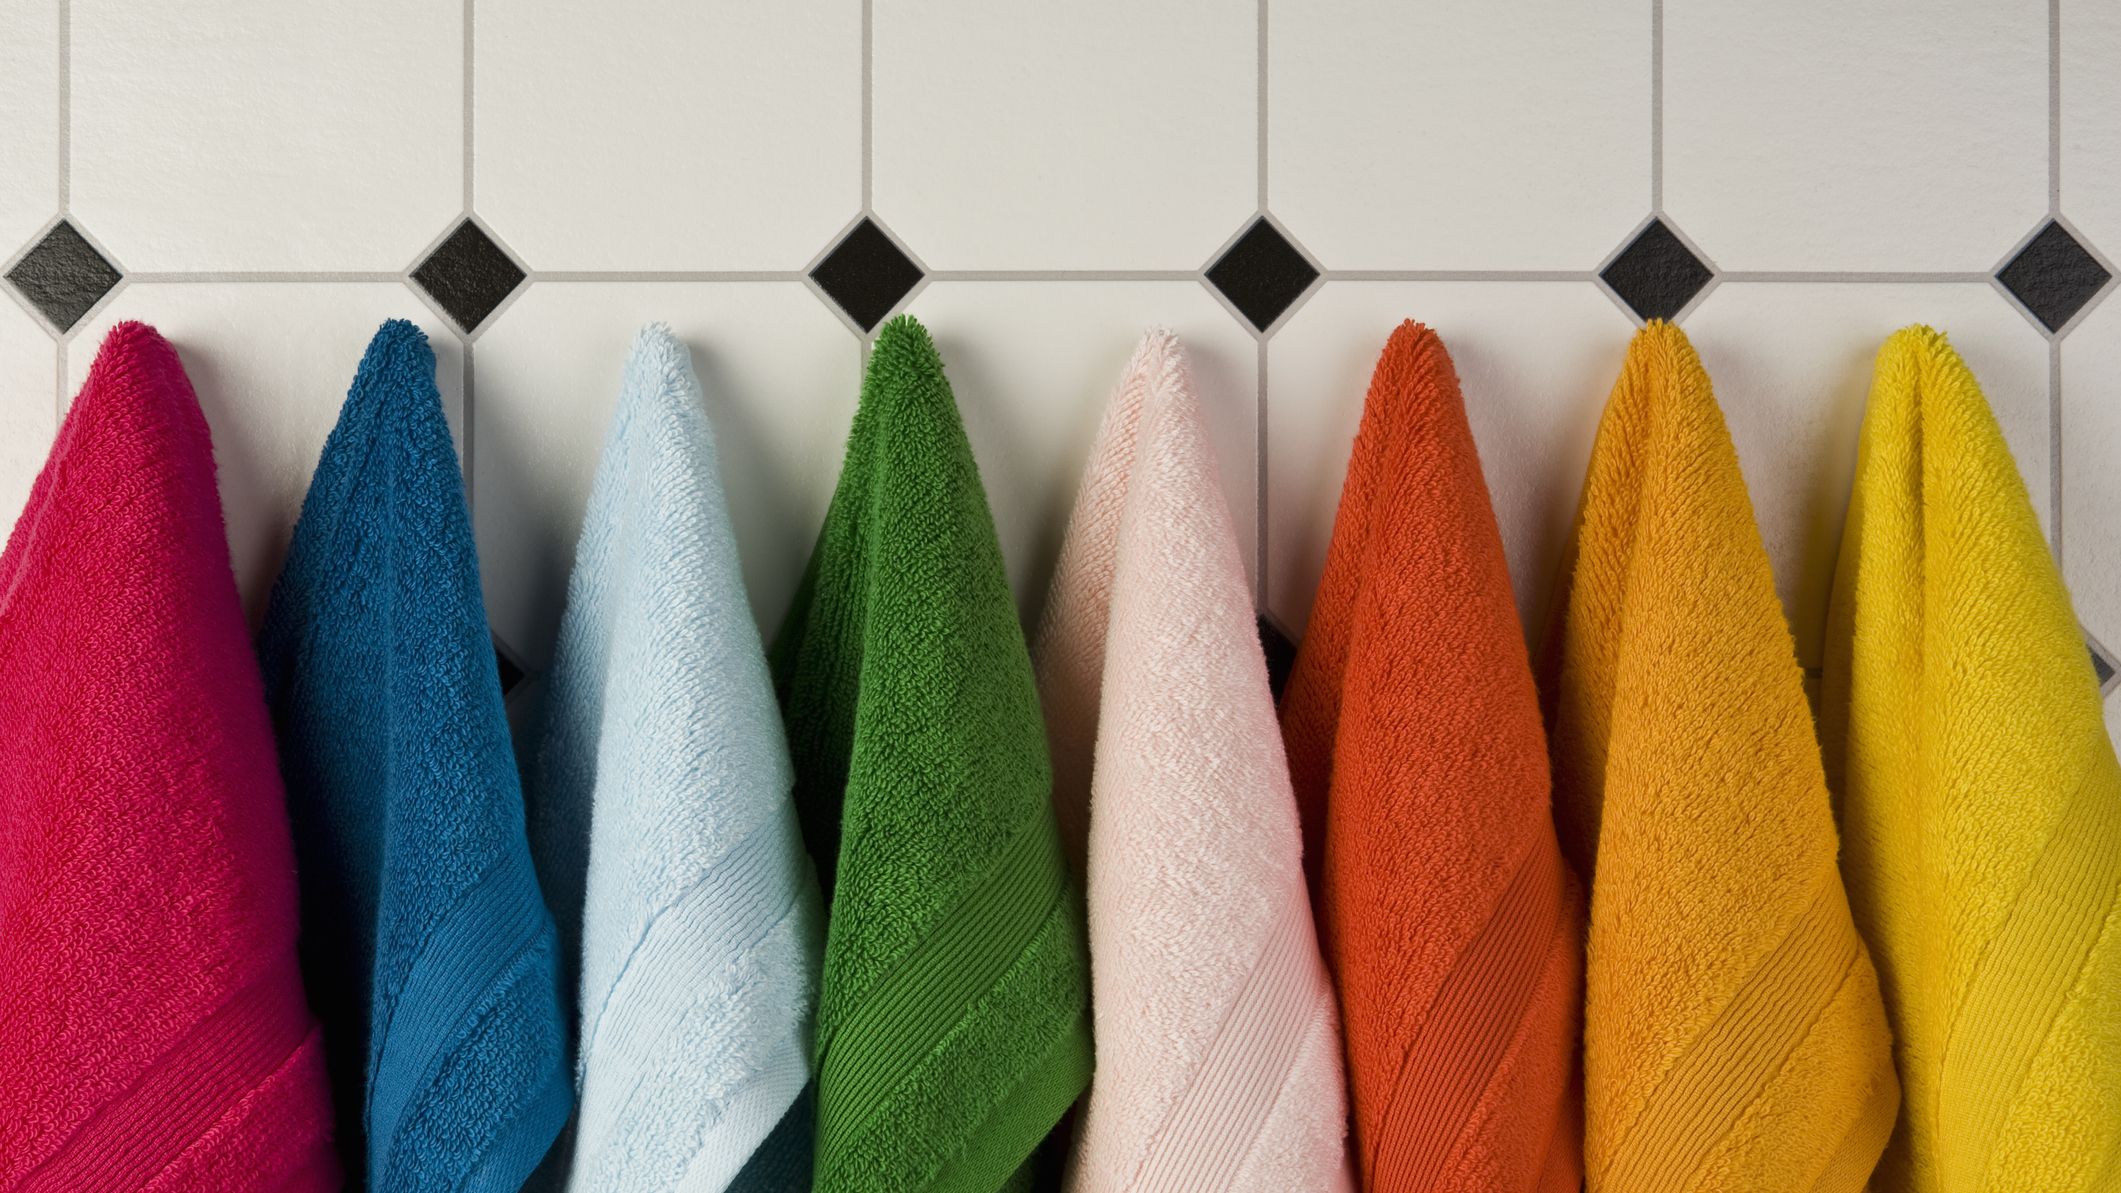 How Often Should You Change Your Towels? Experts Answer This Question.